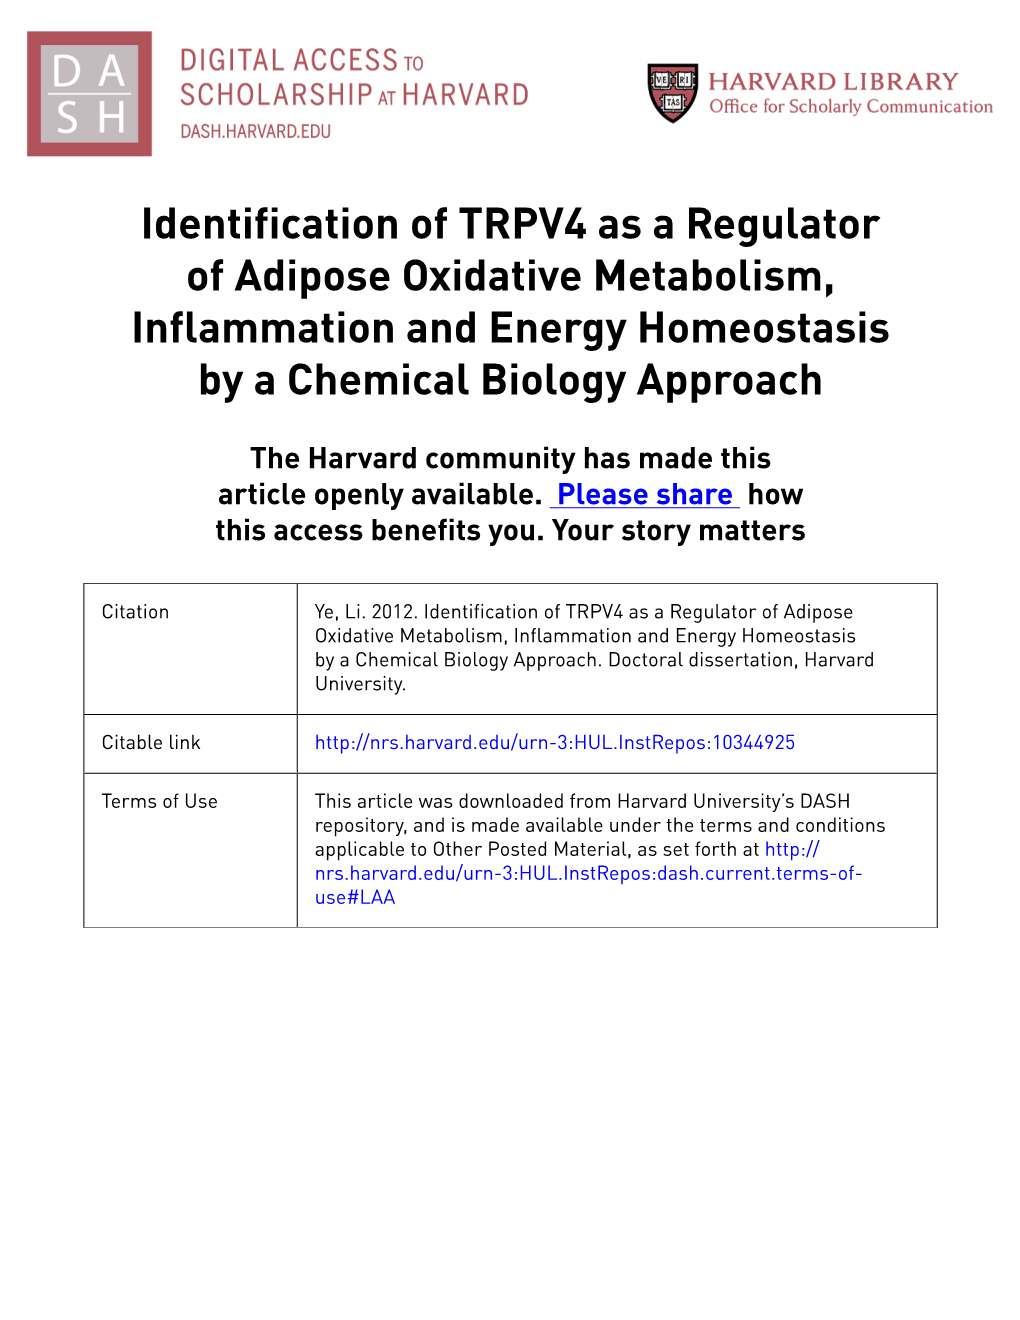 Identification of TRPV4 As a Regulator of Adipose Oxidative Metabolism, Inflammation and Energy Homeostasis by a Chemical Biology Approach